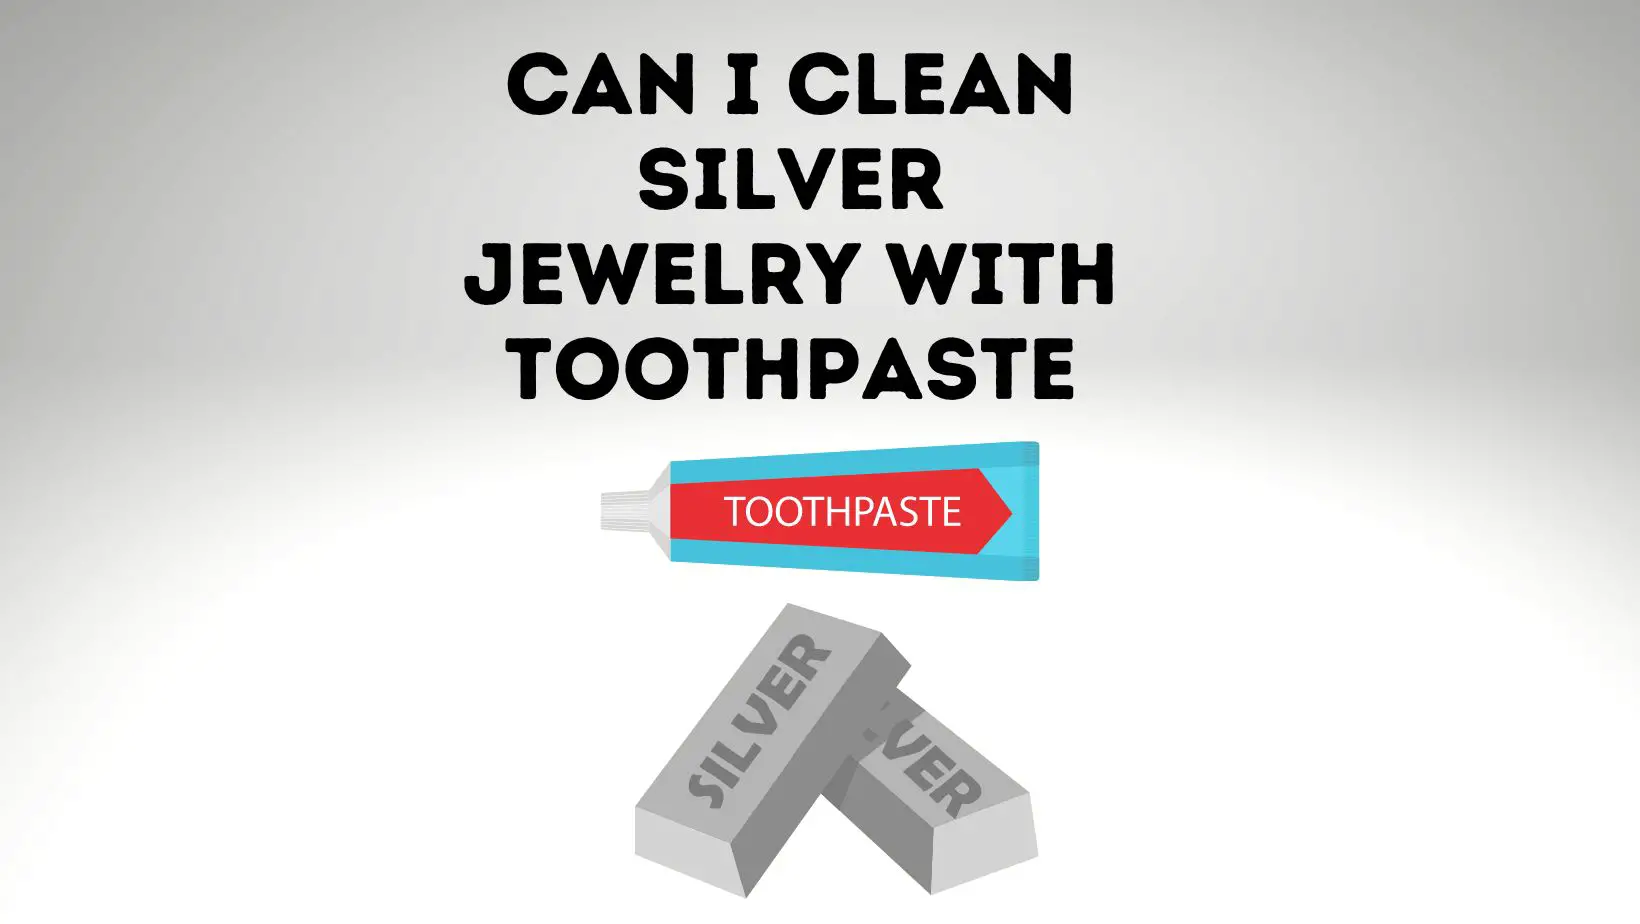 Can I Clean Silver Jewelry With Toothpaste?